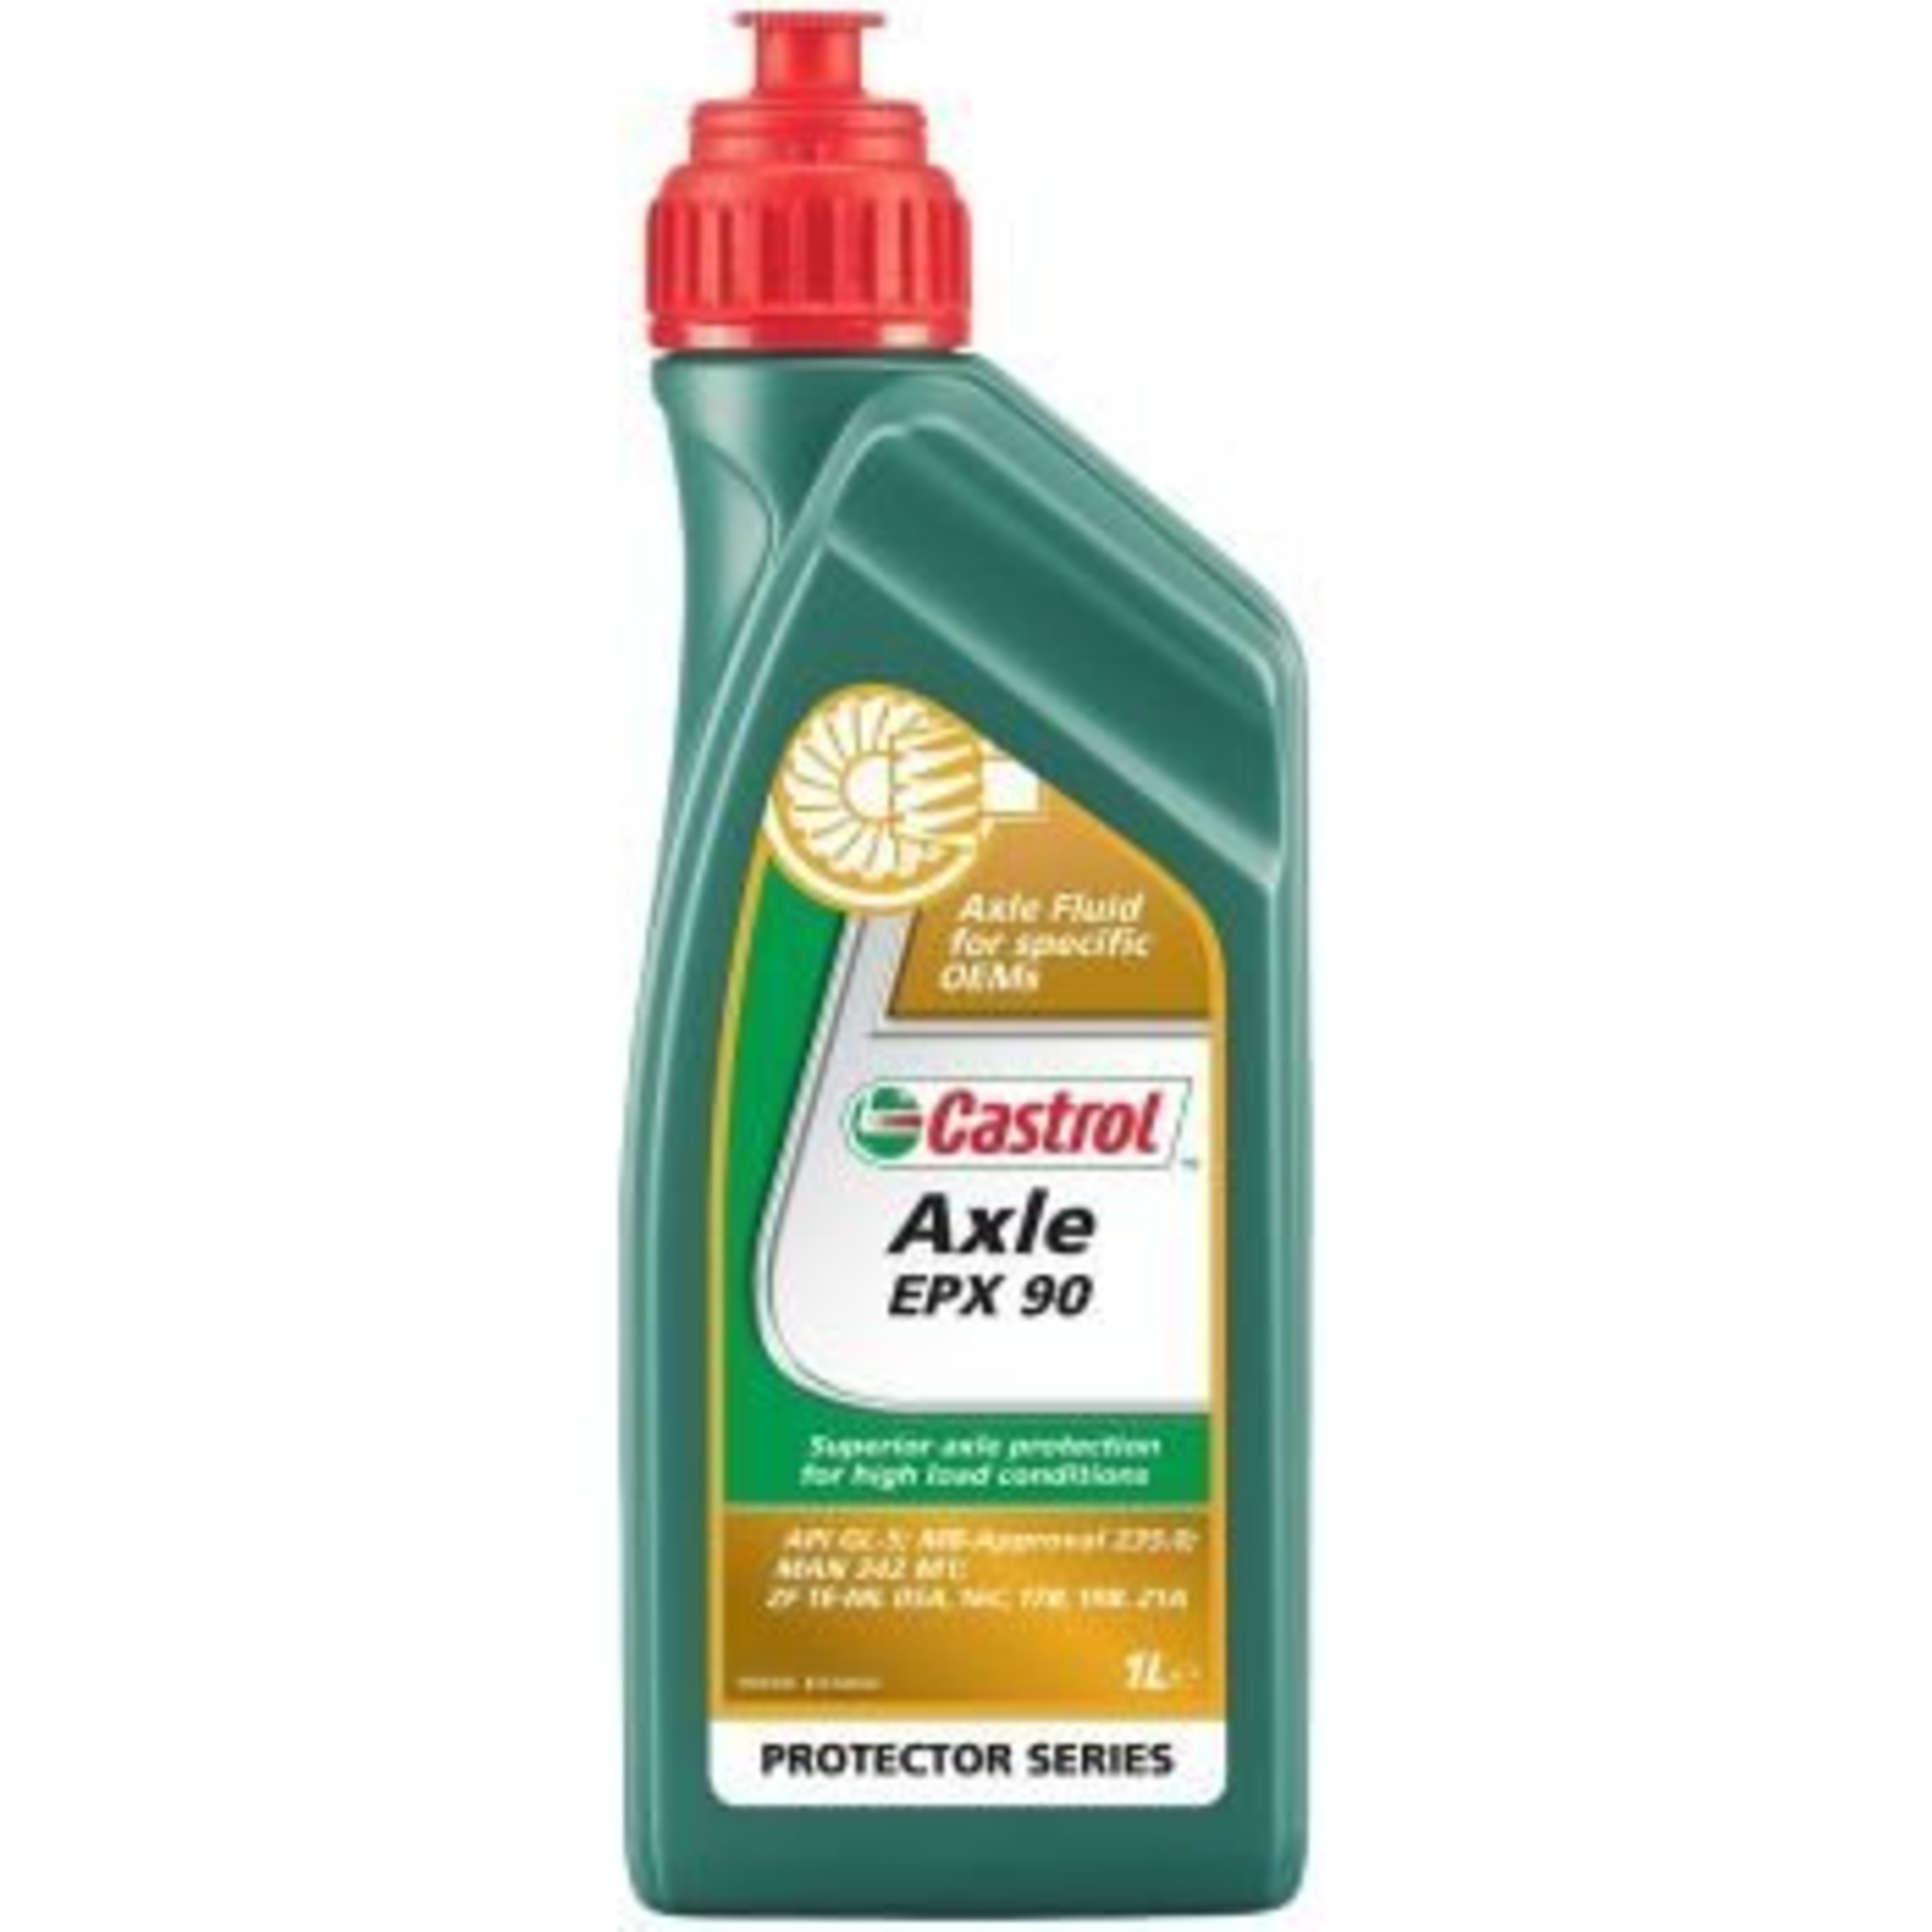 Castrol axle epx 90 (1l)